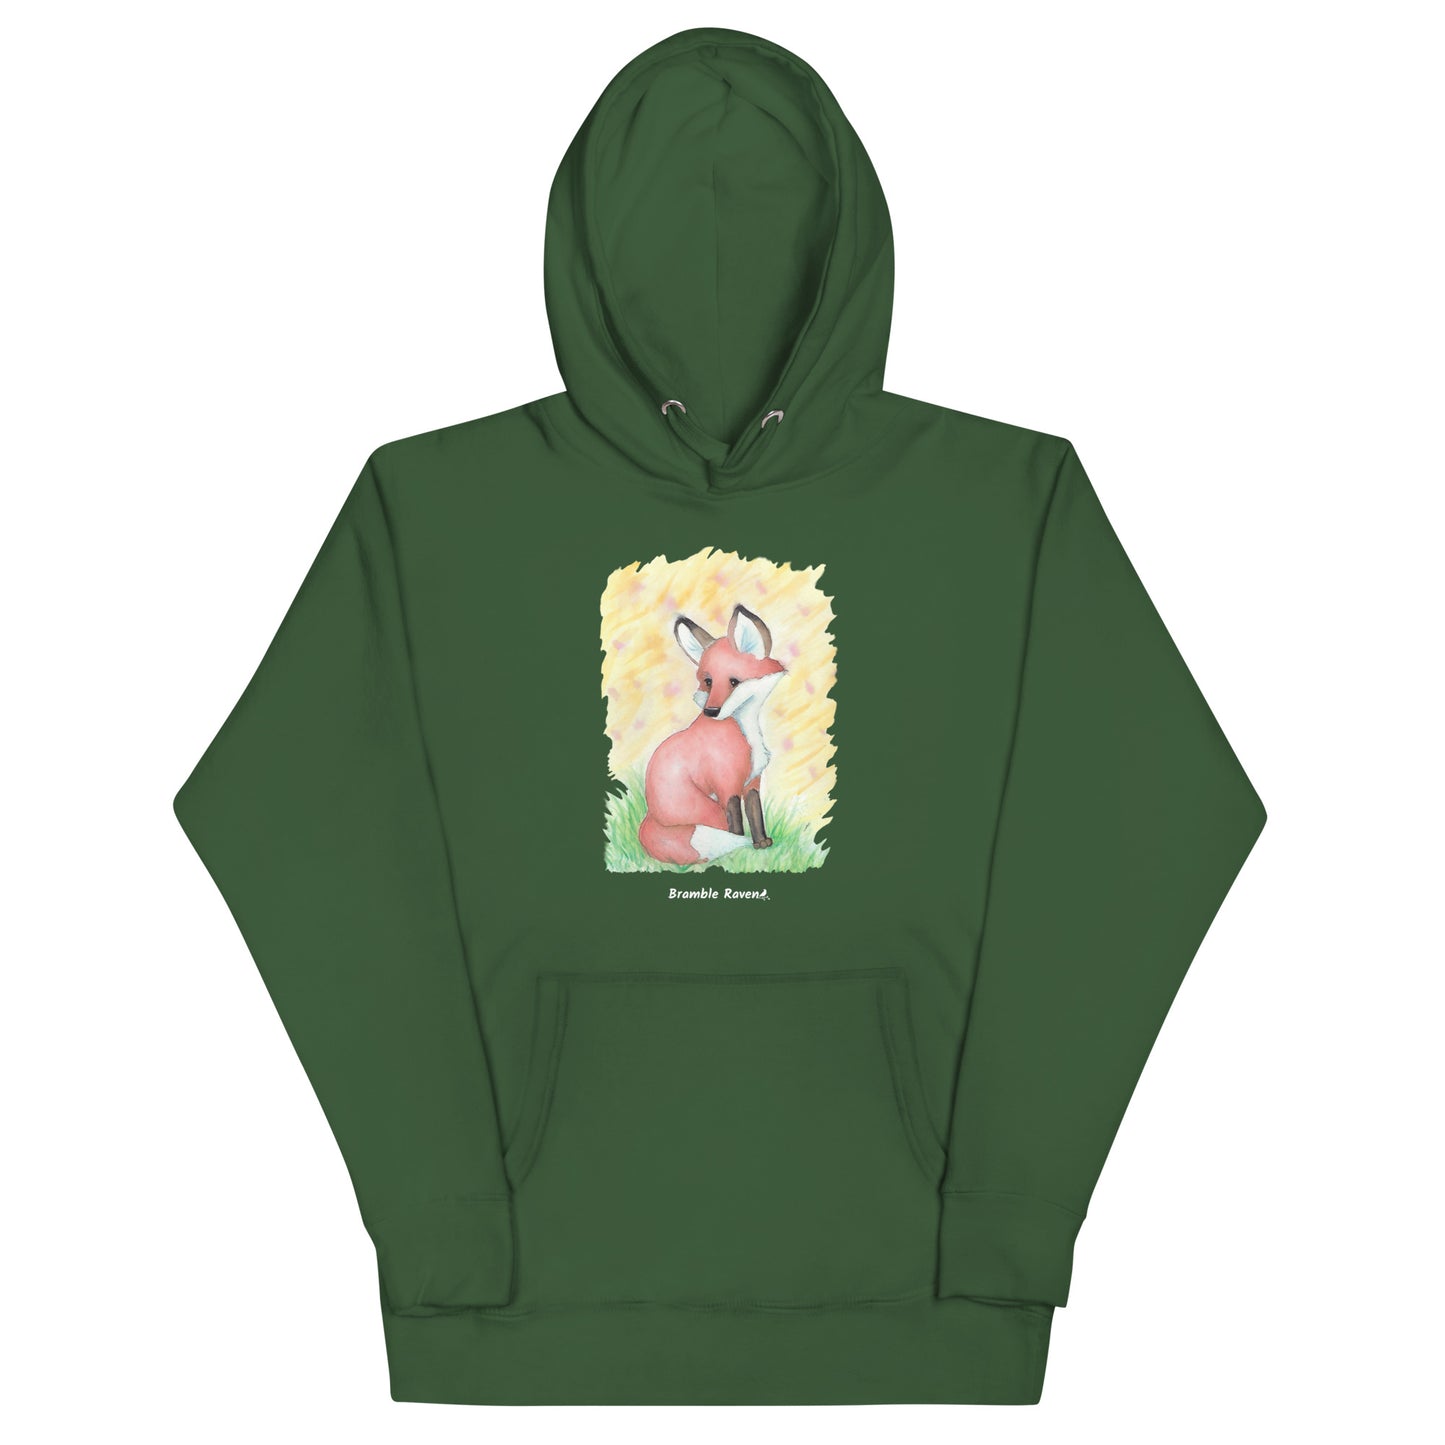 Unisex forest green colored hoodie. Features original watercolor painting of a fox in the grass against a yellow backdrop.